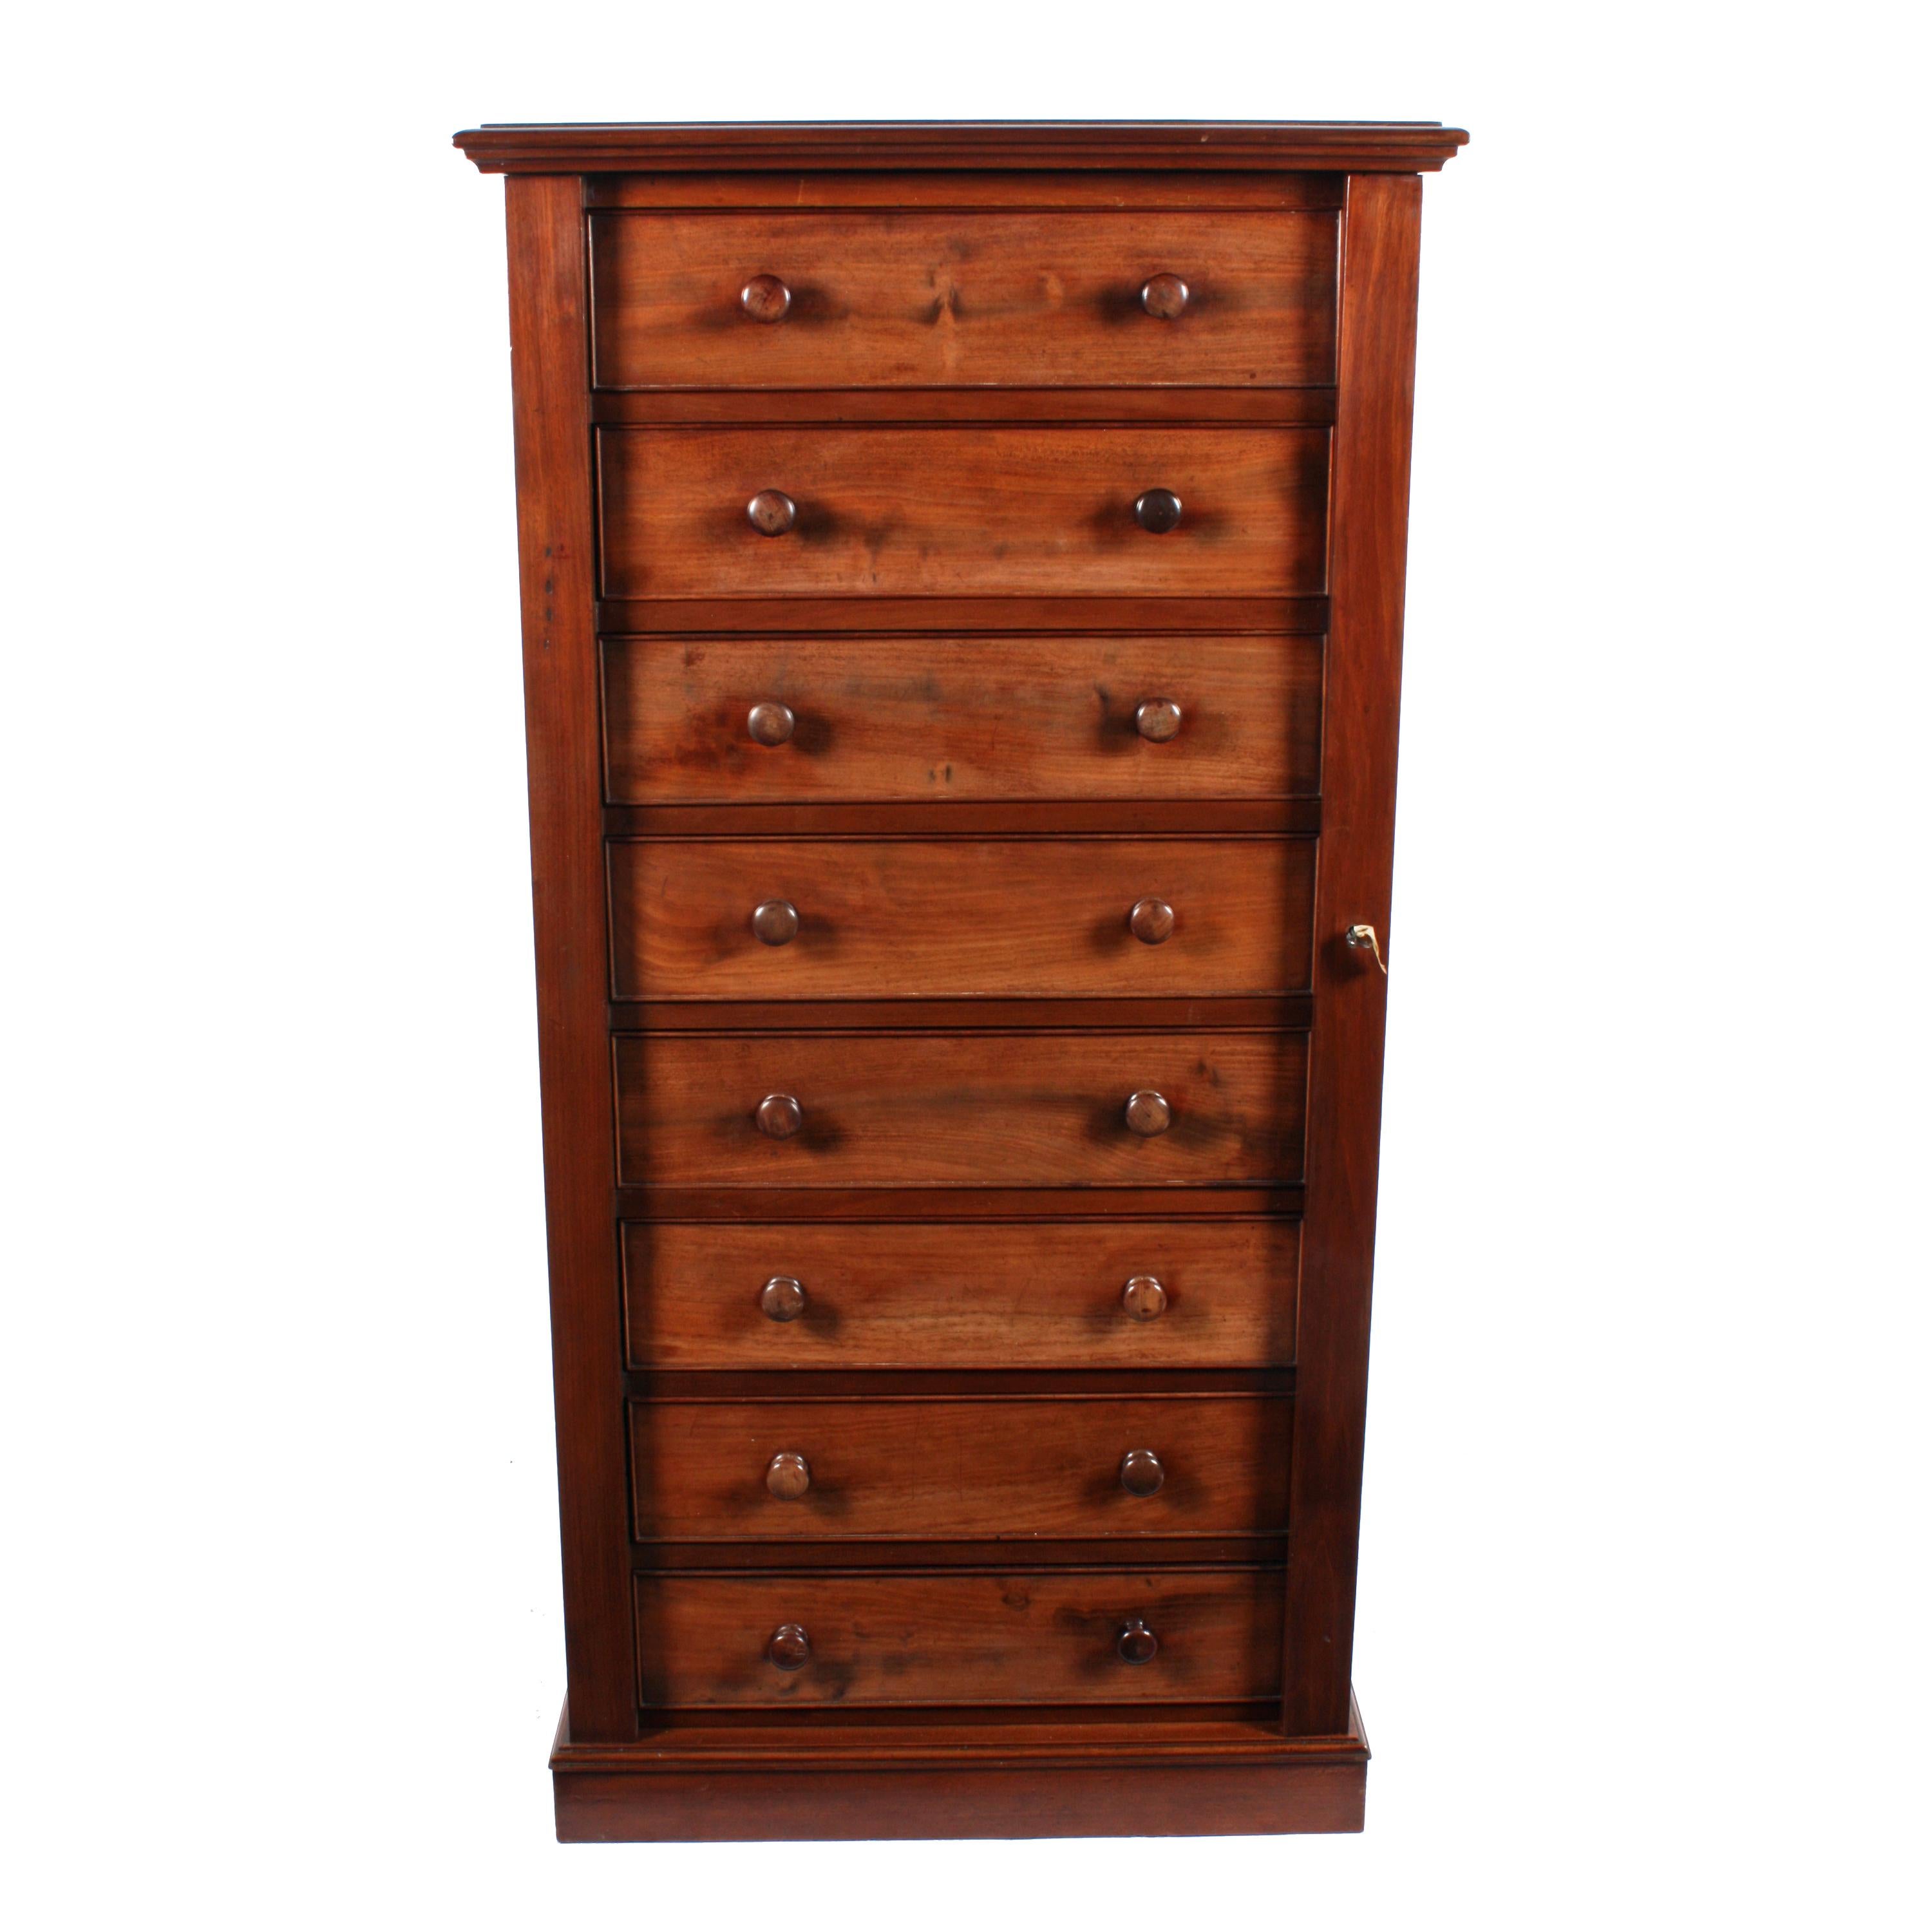 Victorian Mahogany Wellington chest


A 19th century Victorian mahogany Wellington chest.

The chest has eight mahogany lined drawers with a cock beaded edge and turned flat knob handles.

The two top drawers are divided inside into four